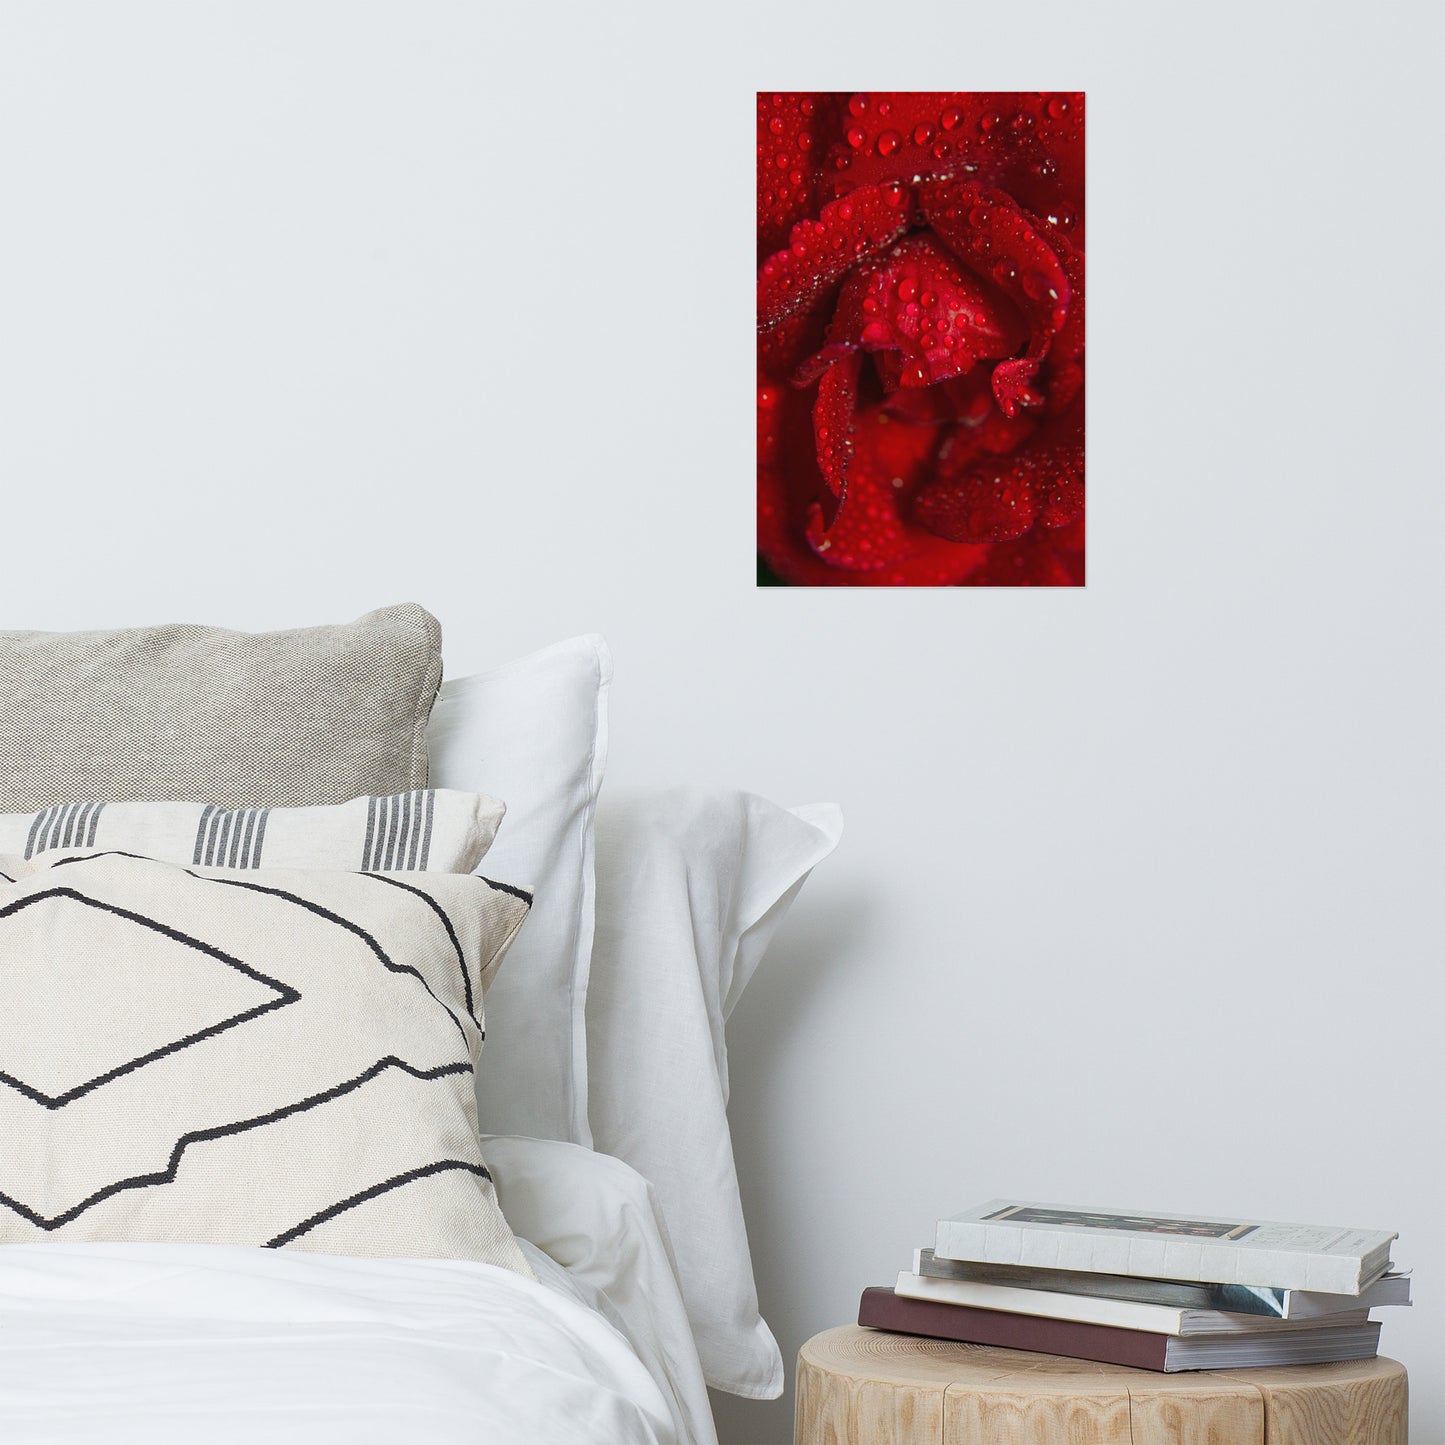 Royal Red Rose Floral Nature Photo Loose Unframed Wall Art Prints